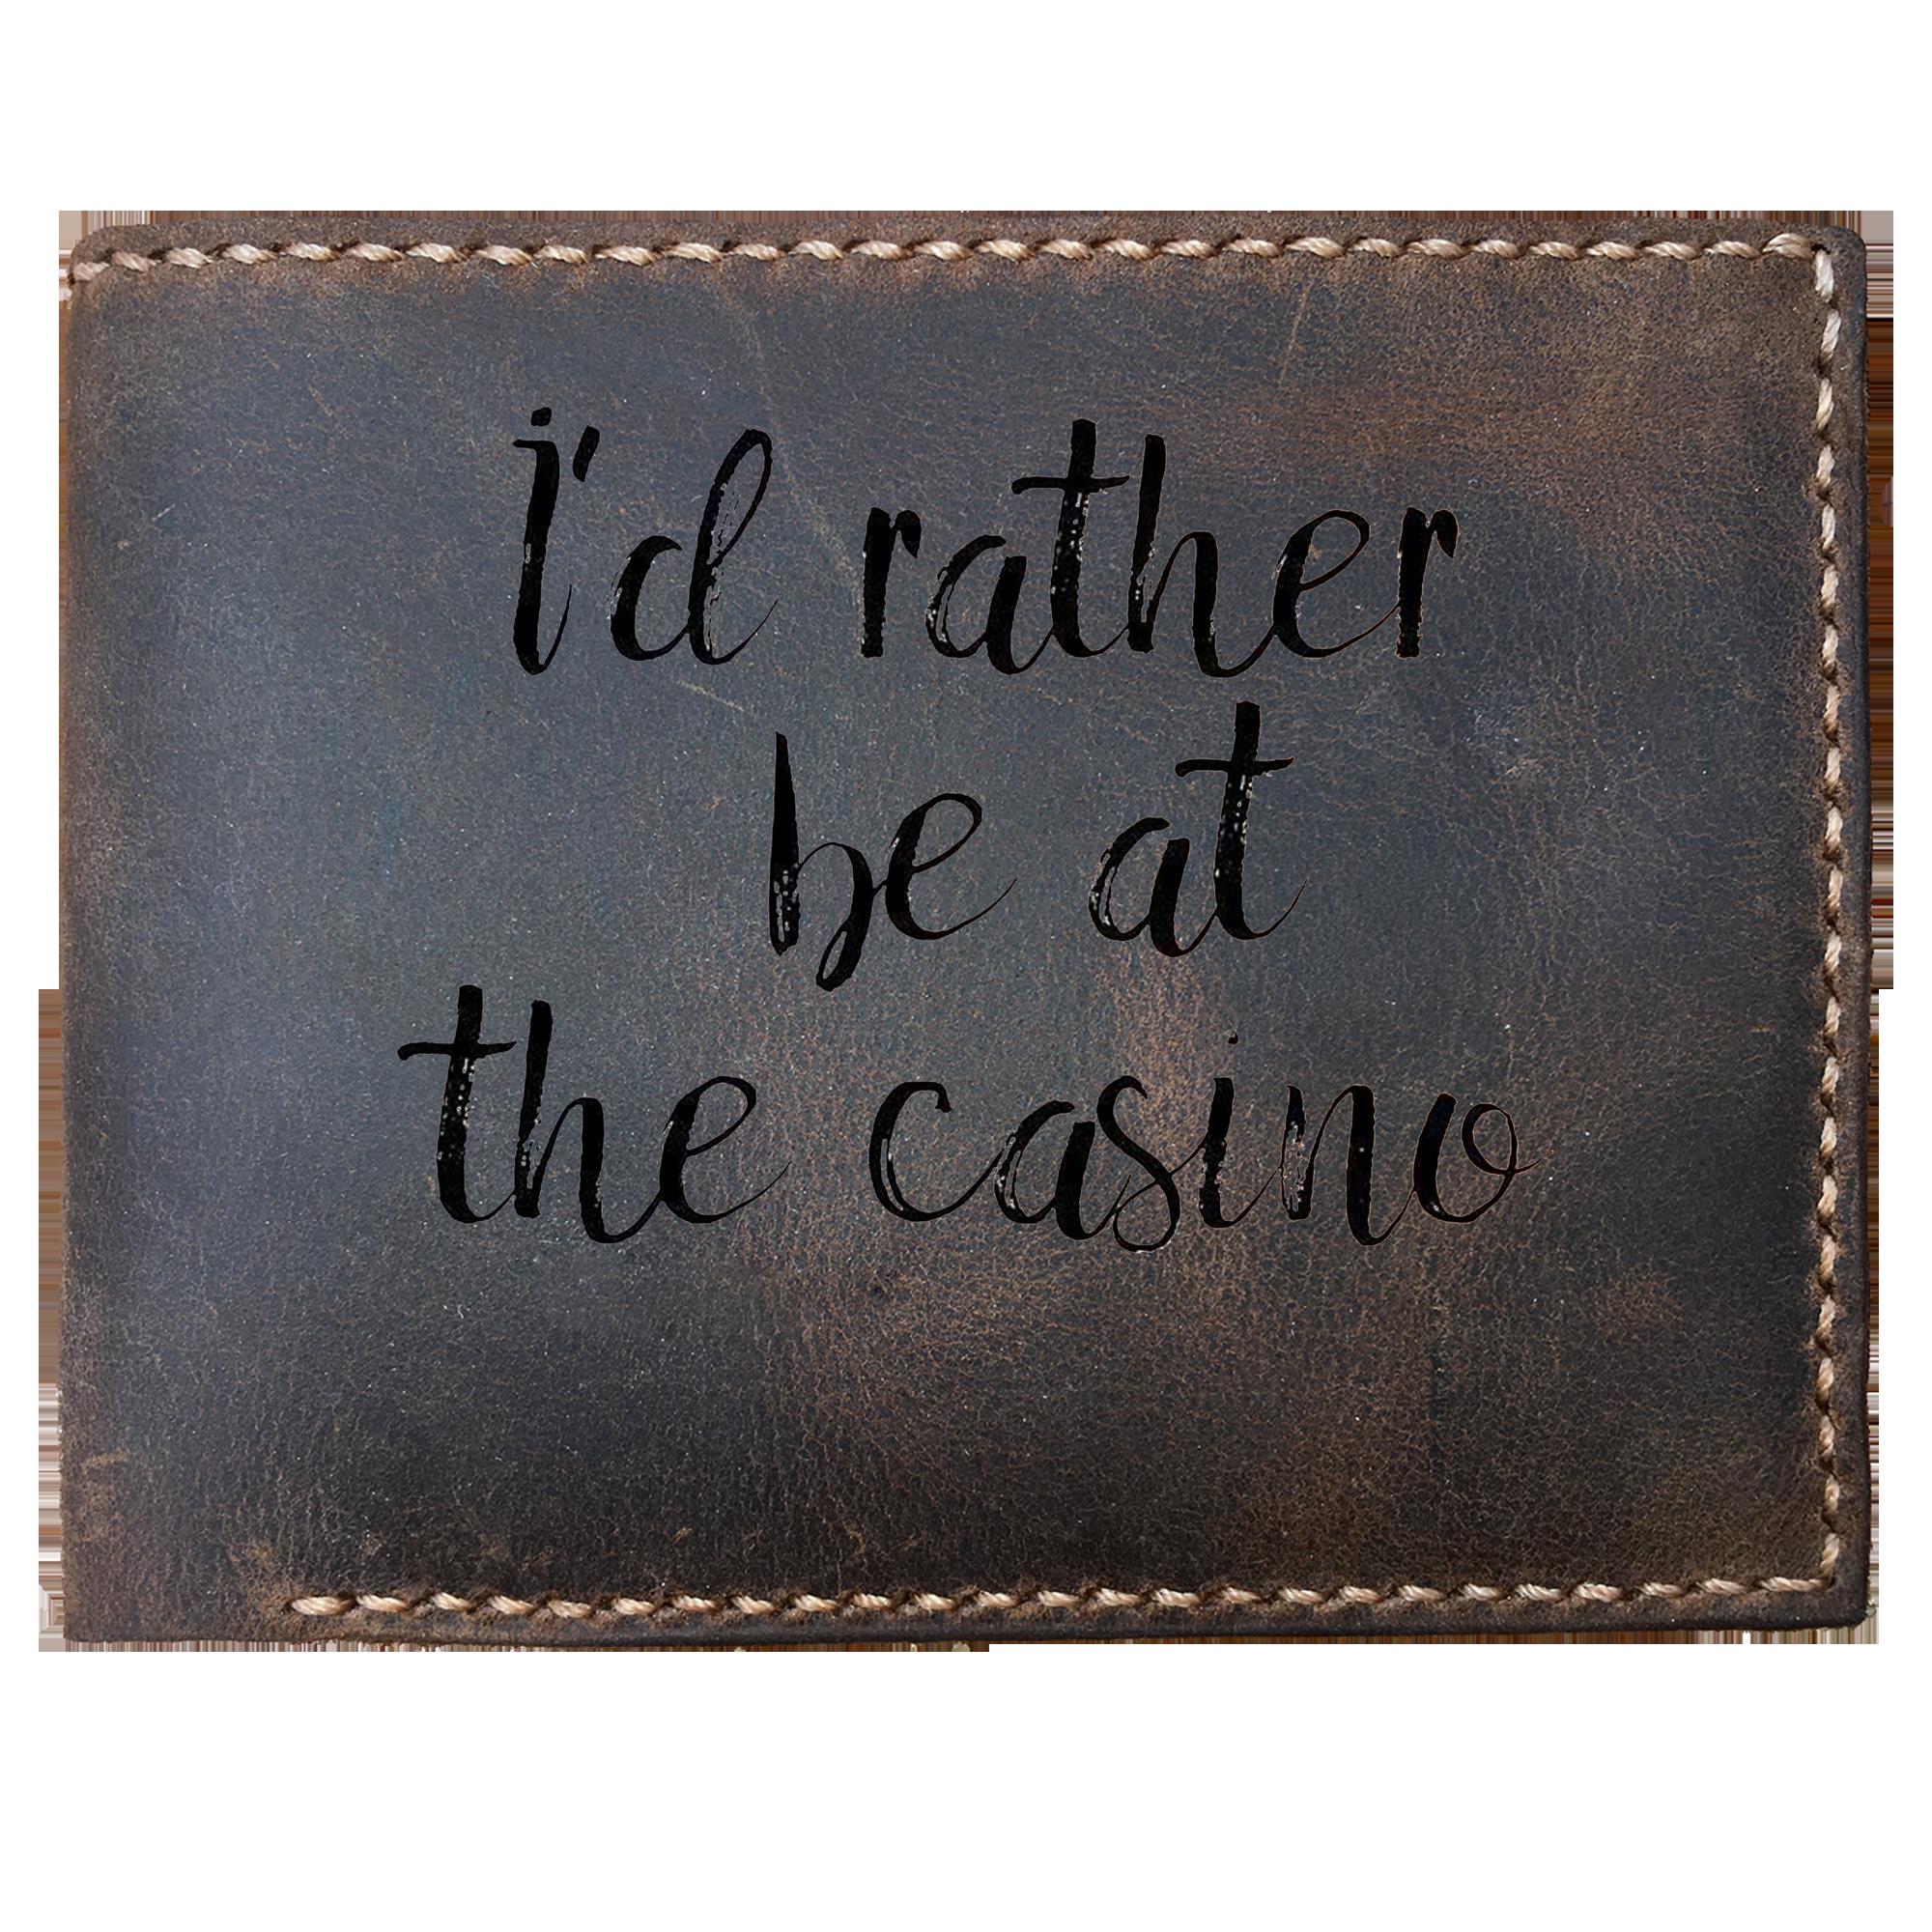 Skitongifts Funny Custom Laser Engraved Bifold Leather Wallet For Men, I'd Rather Be At The Casino